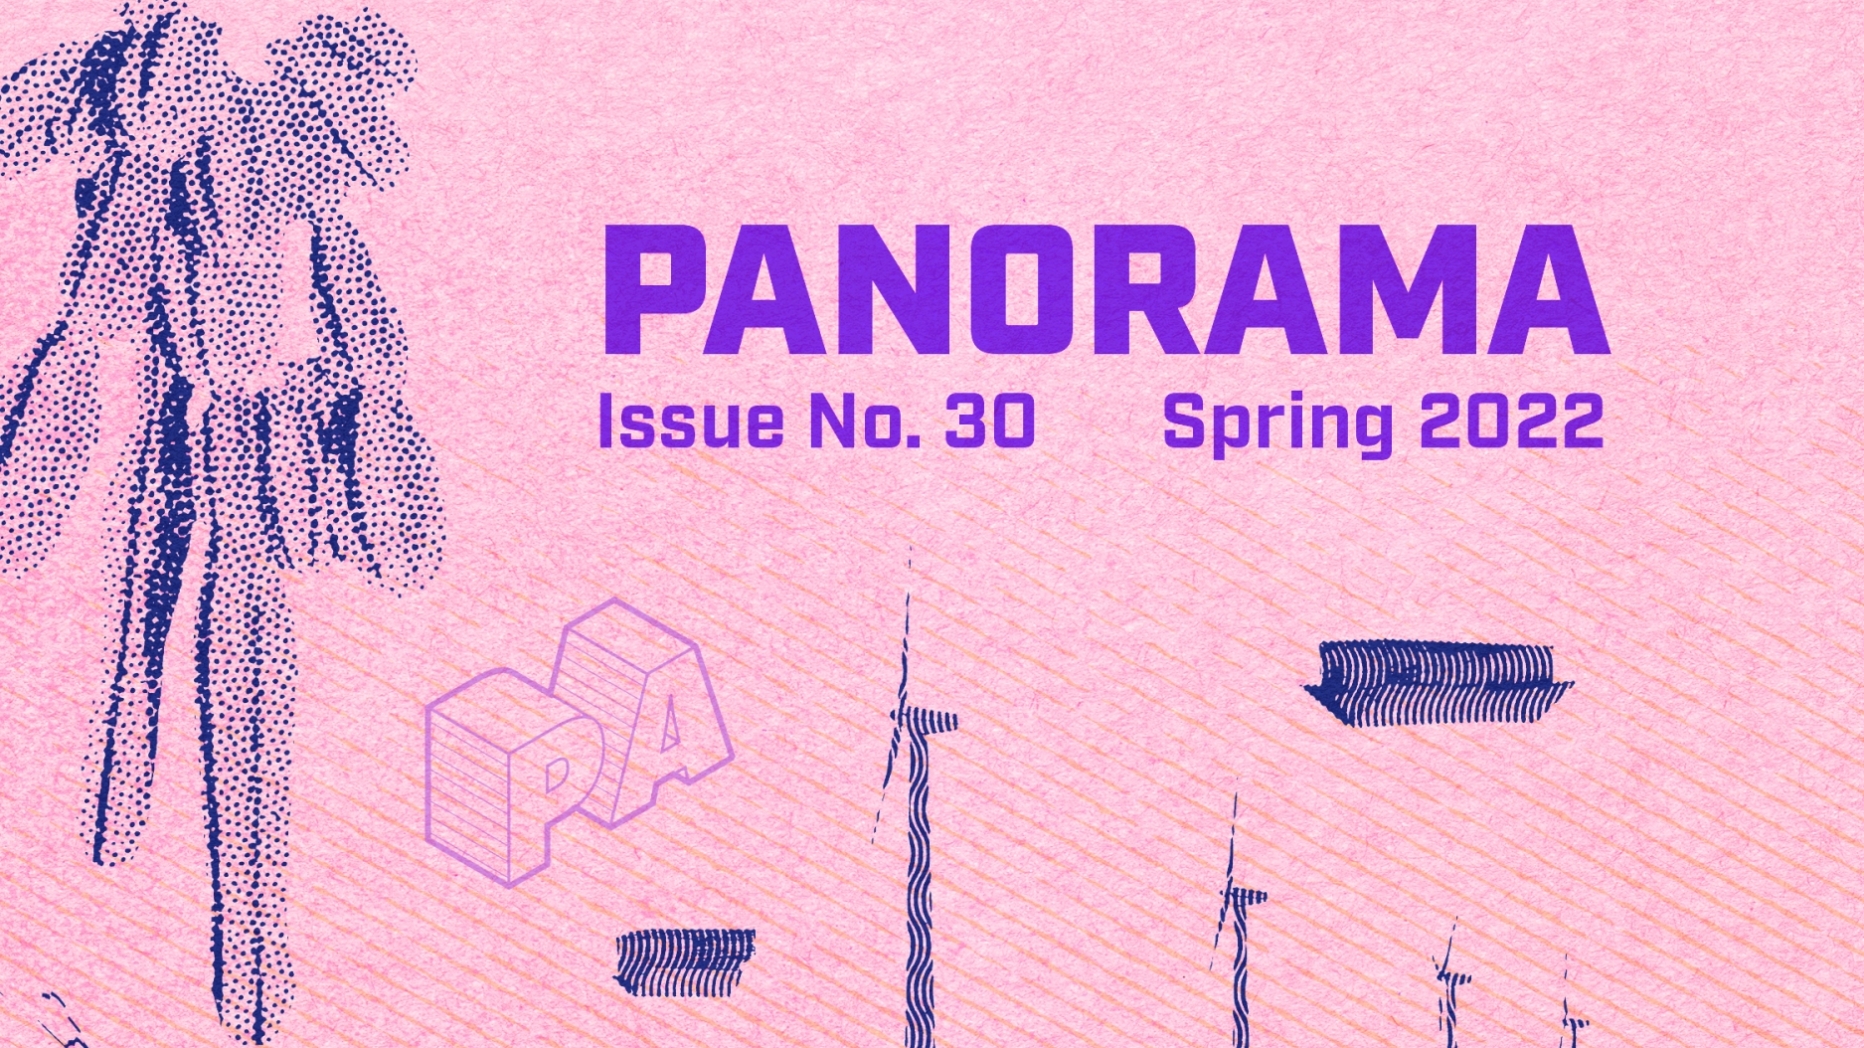 Panorama 2022 Cover. Issue Number 30, Spring 2022.